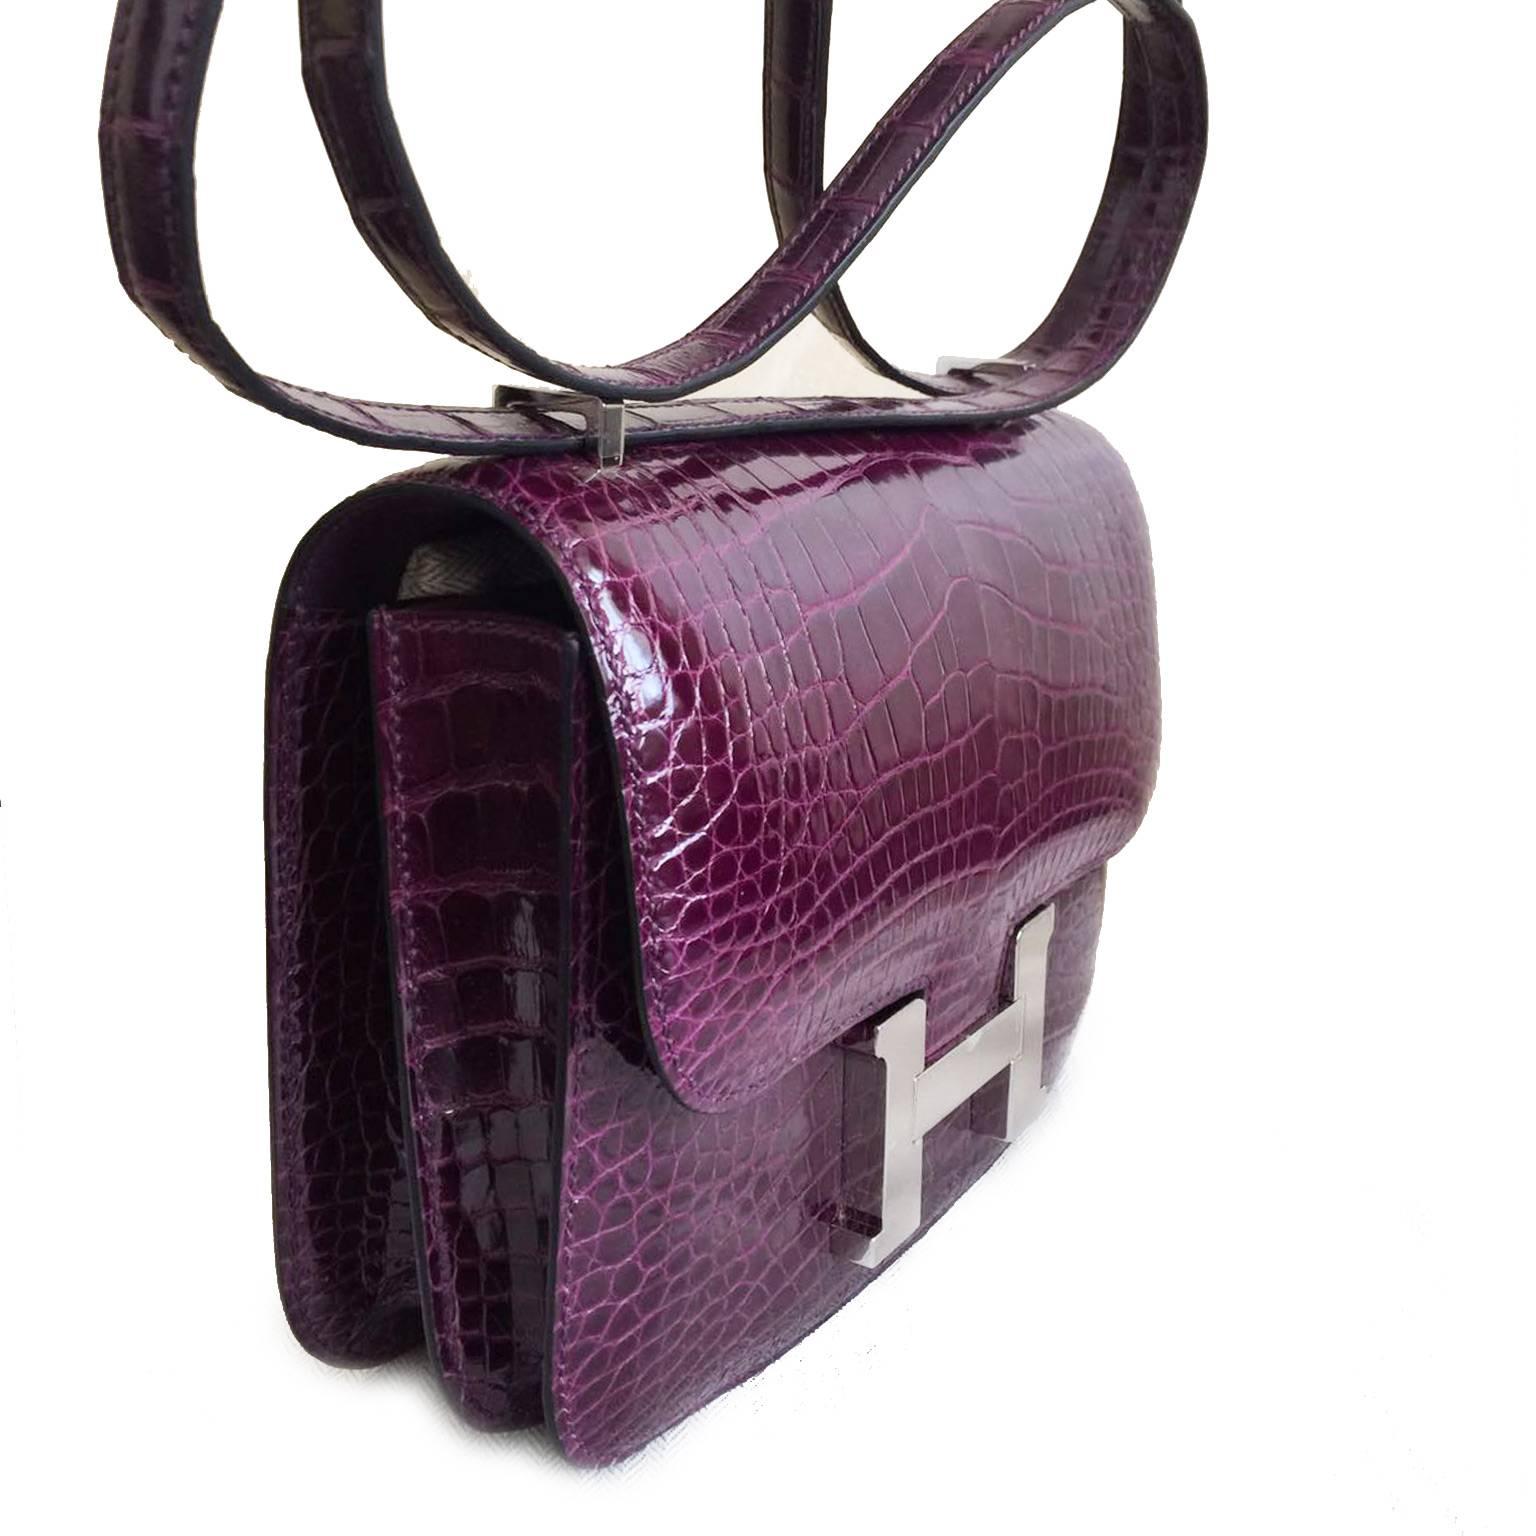 Brand New!

Brand New Constance MIni Cassis Alligator Lisse 

This exquisite hard to find Hermès Constance Mini bag is featured in Cassis color.
The Constance is a simply, elegant shoulder bag with a long leather strap that can be doubled. The ‘H’